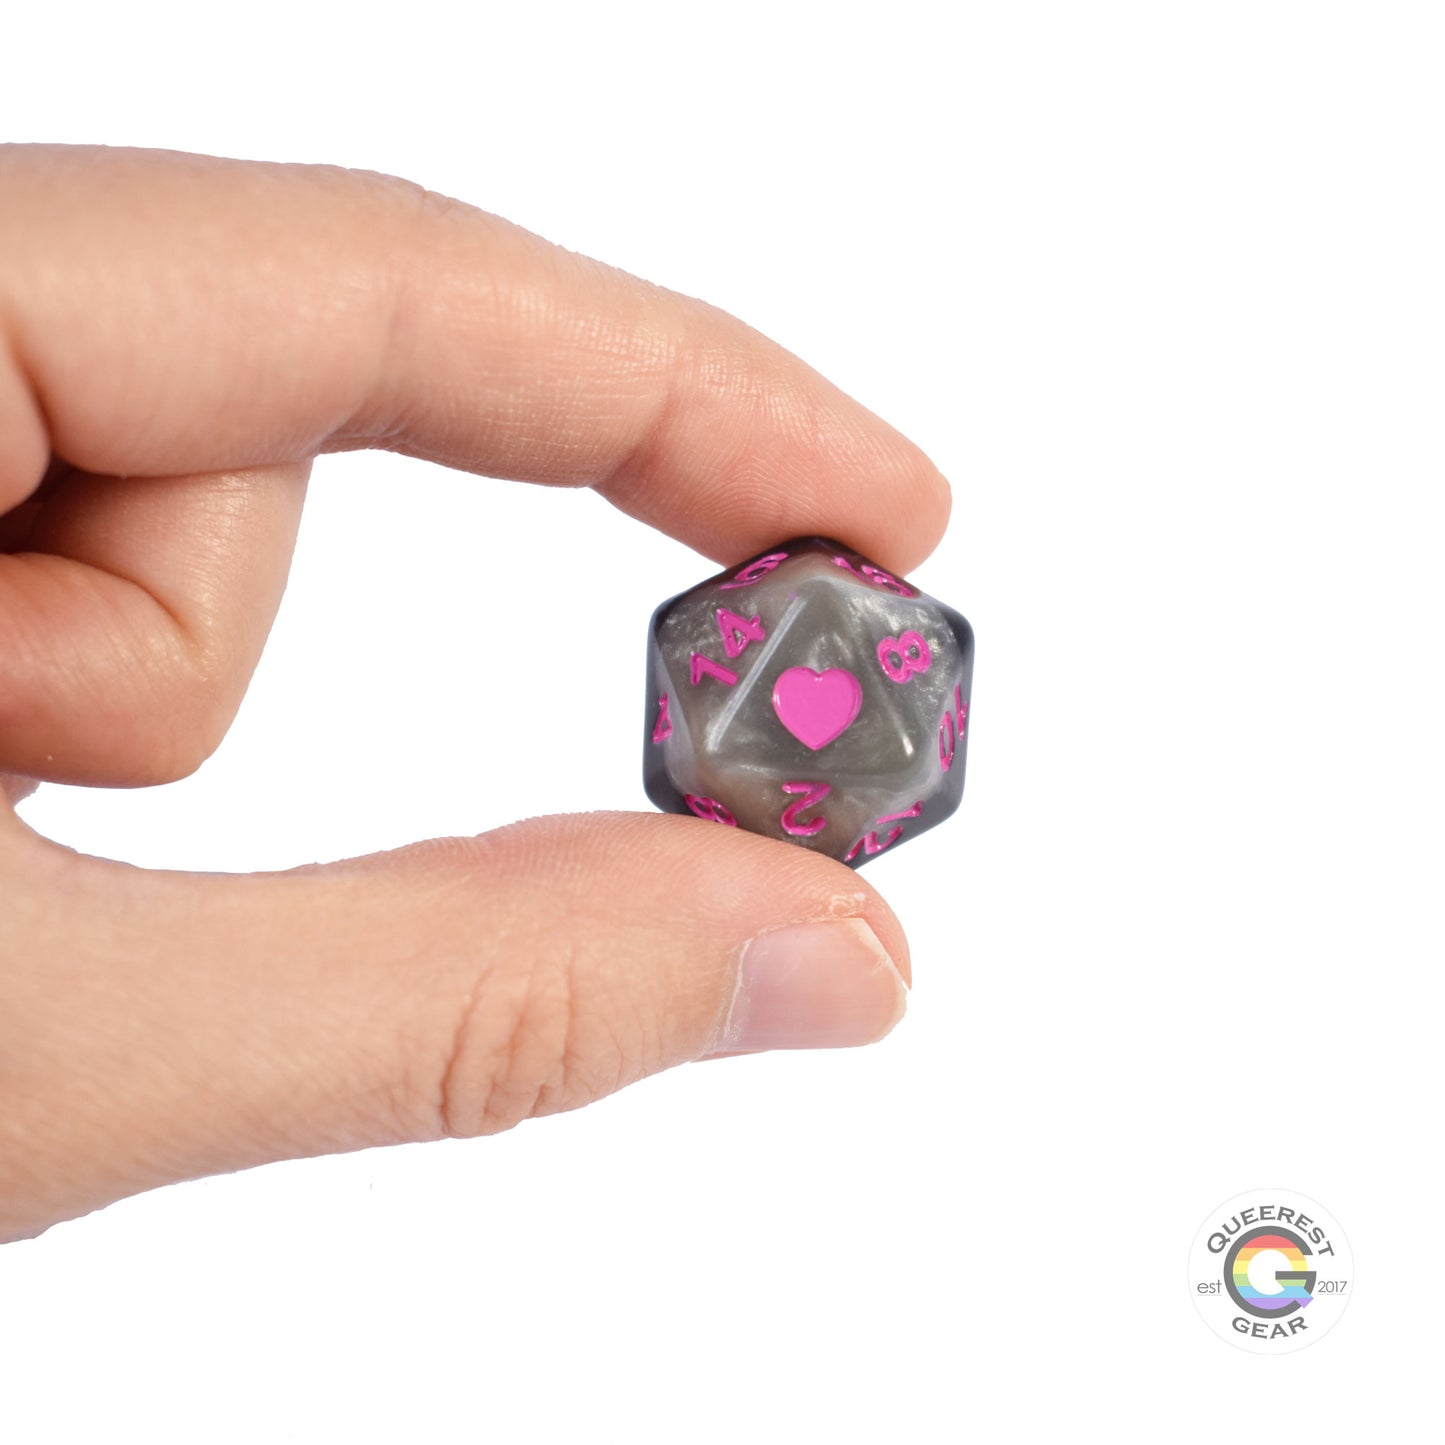 A hand holding up the demisexual d20 to show off the heart, color, and transparency